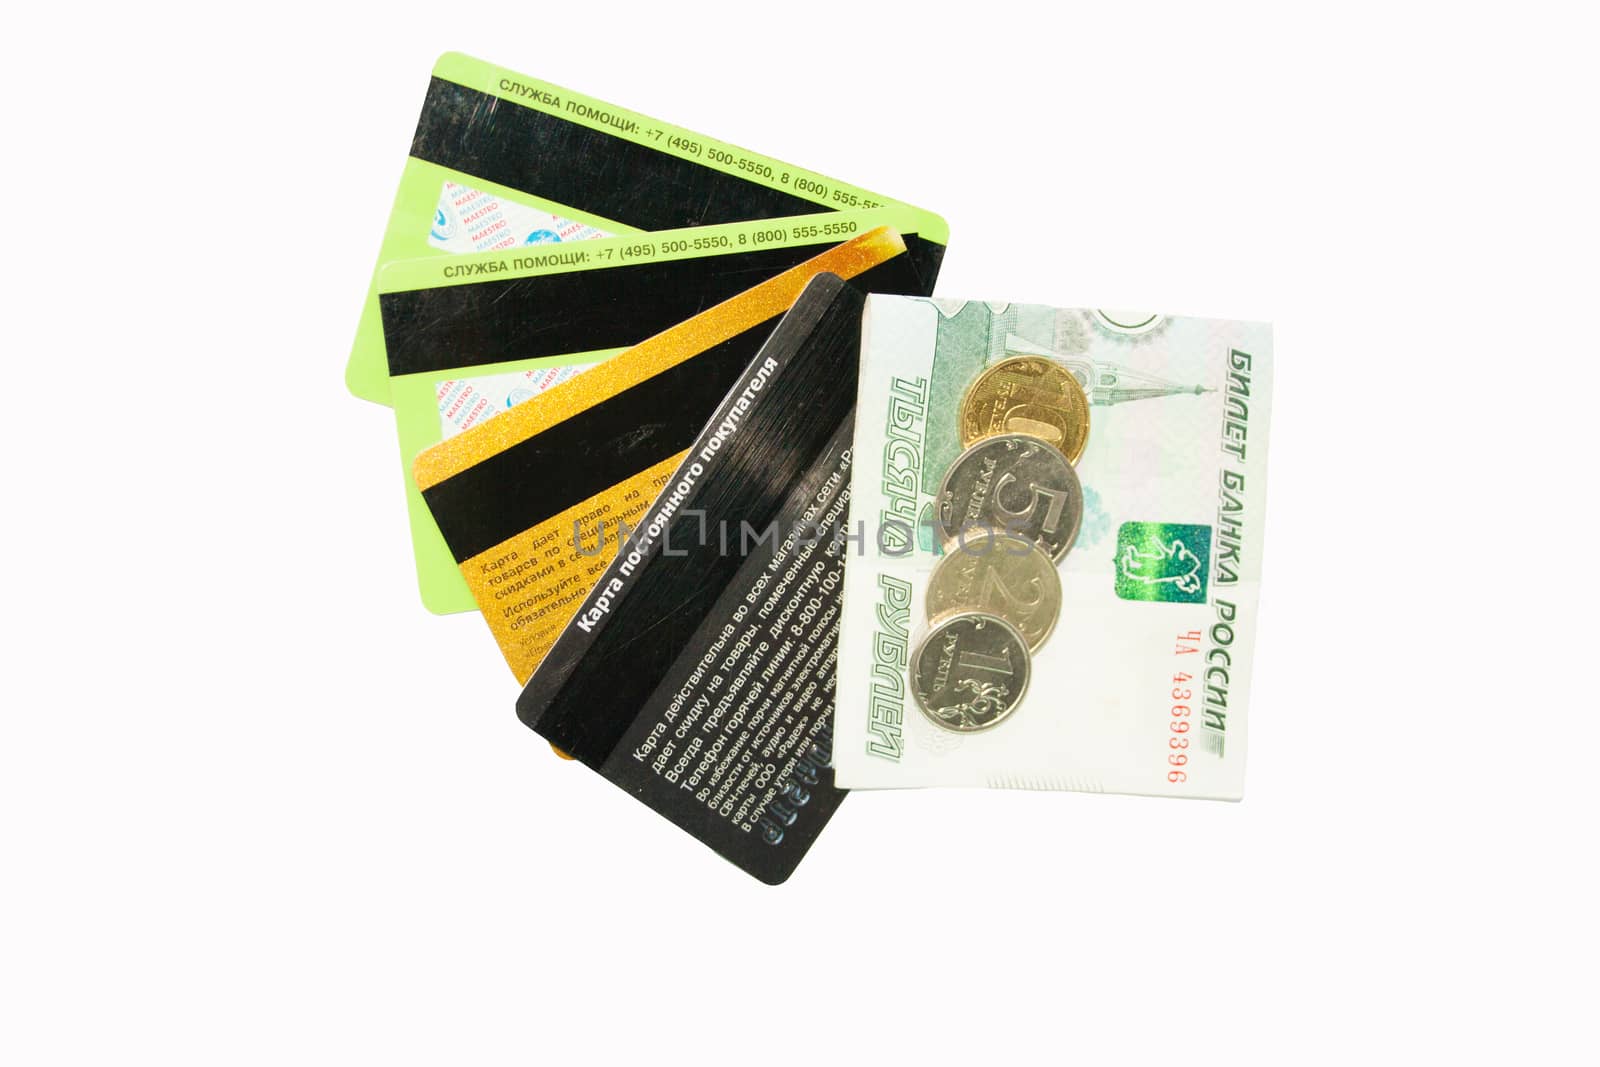 The Russian money lies on credit cards on a white background. Cards in the form of a fan